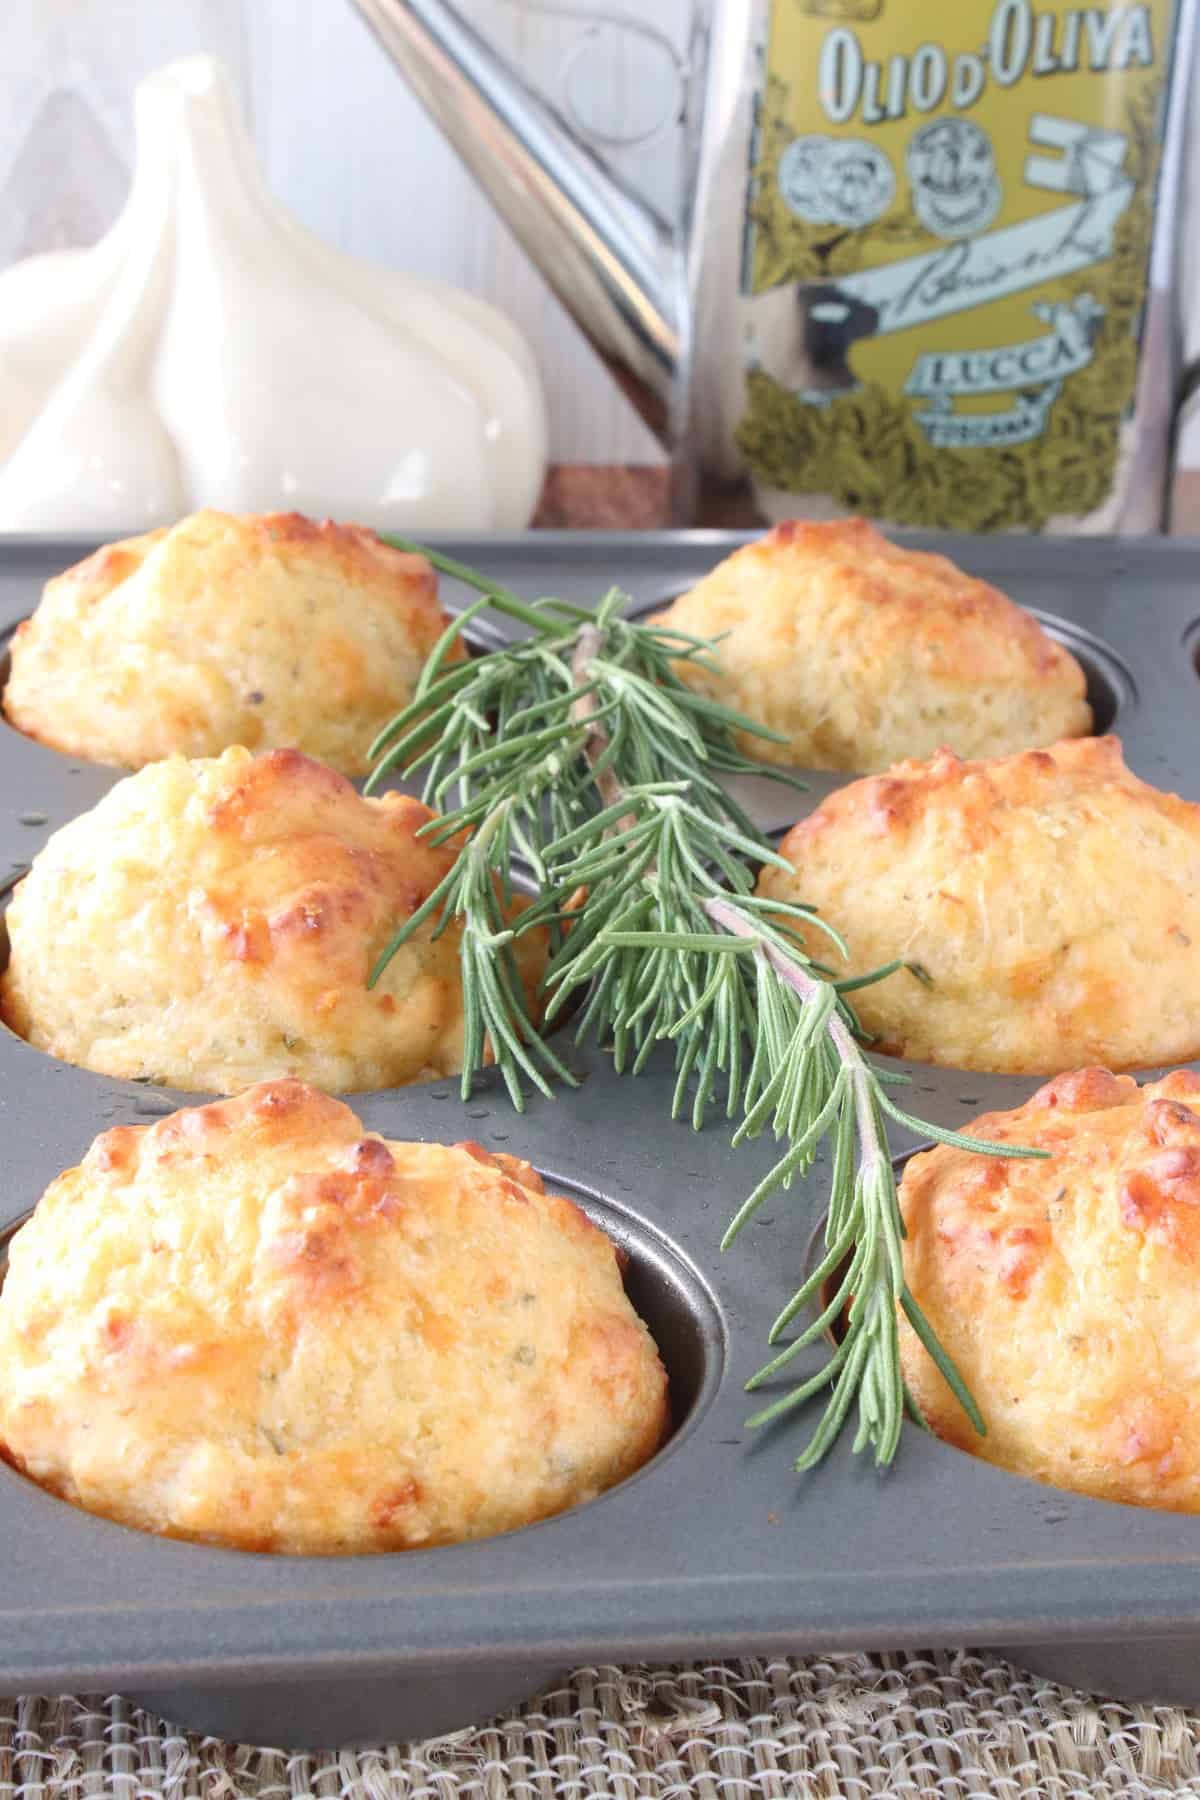 A muffin tin filled with golden brown baked Garlic Rosemary Focaccia Muffins.